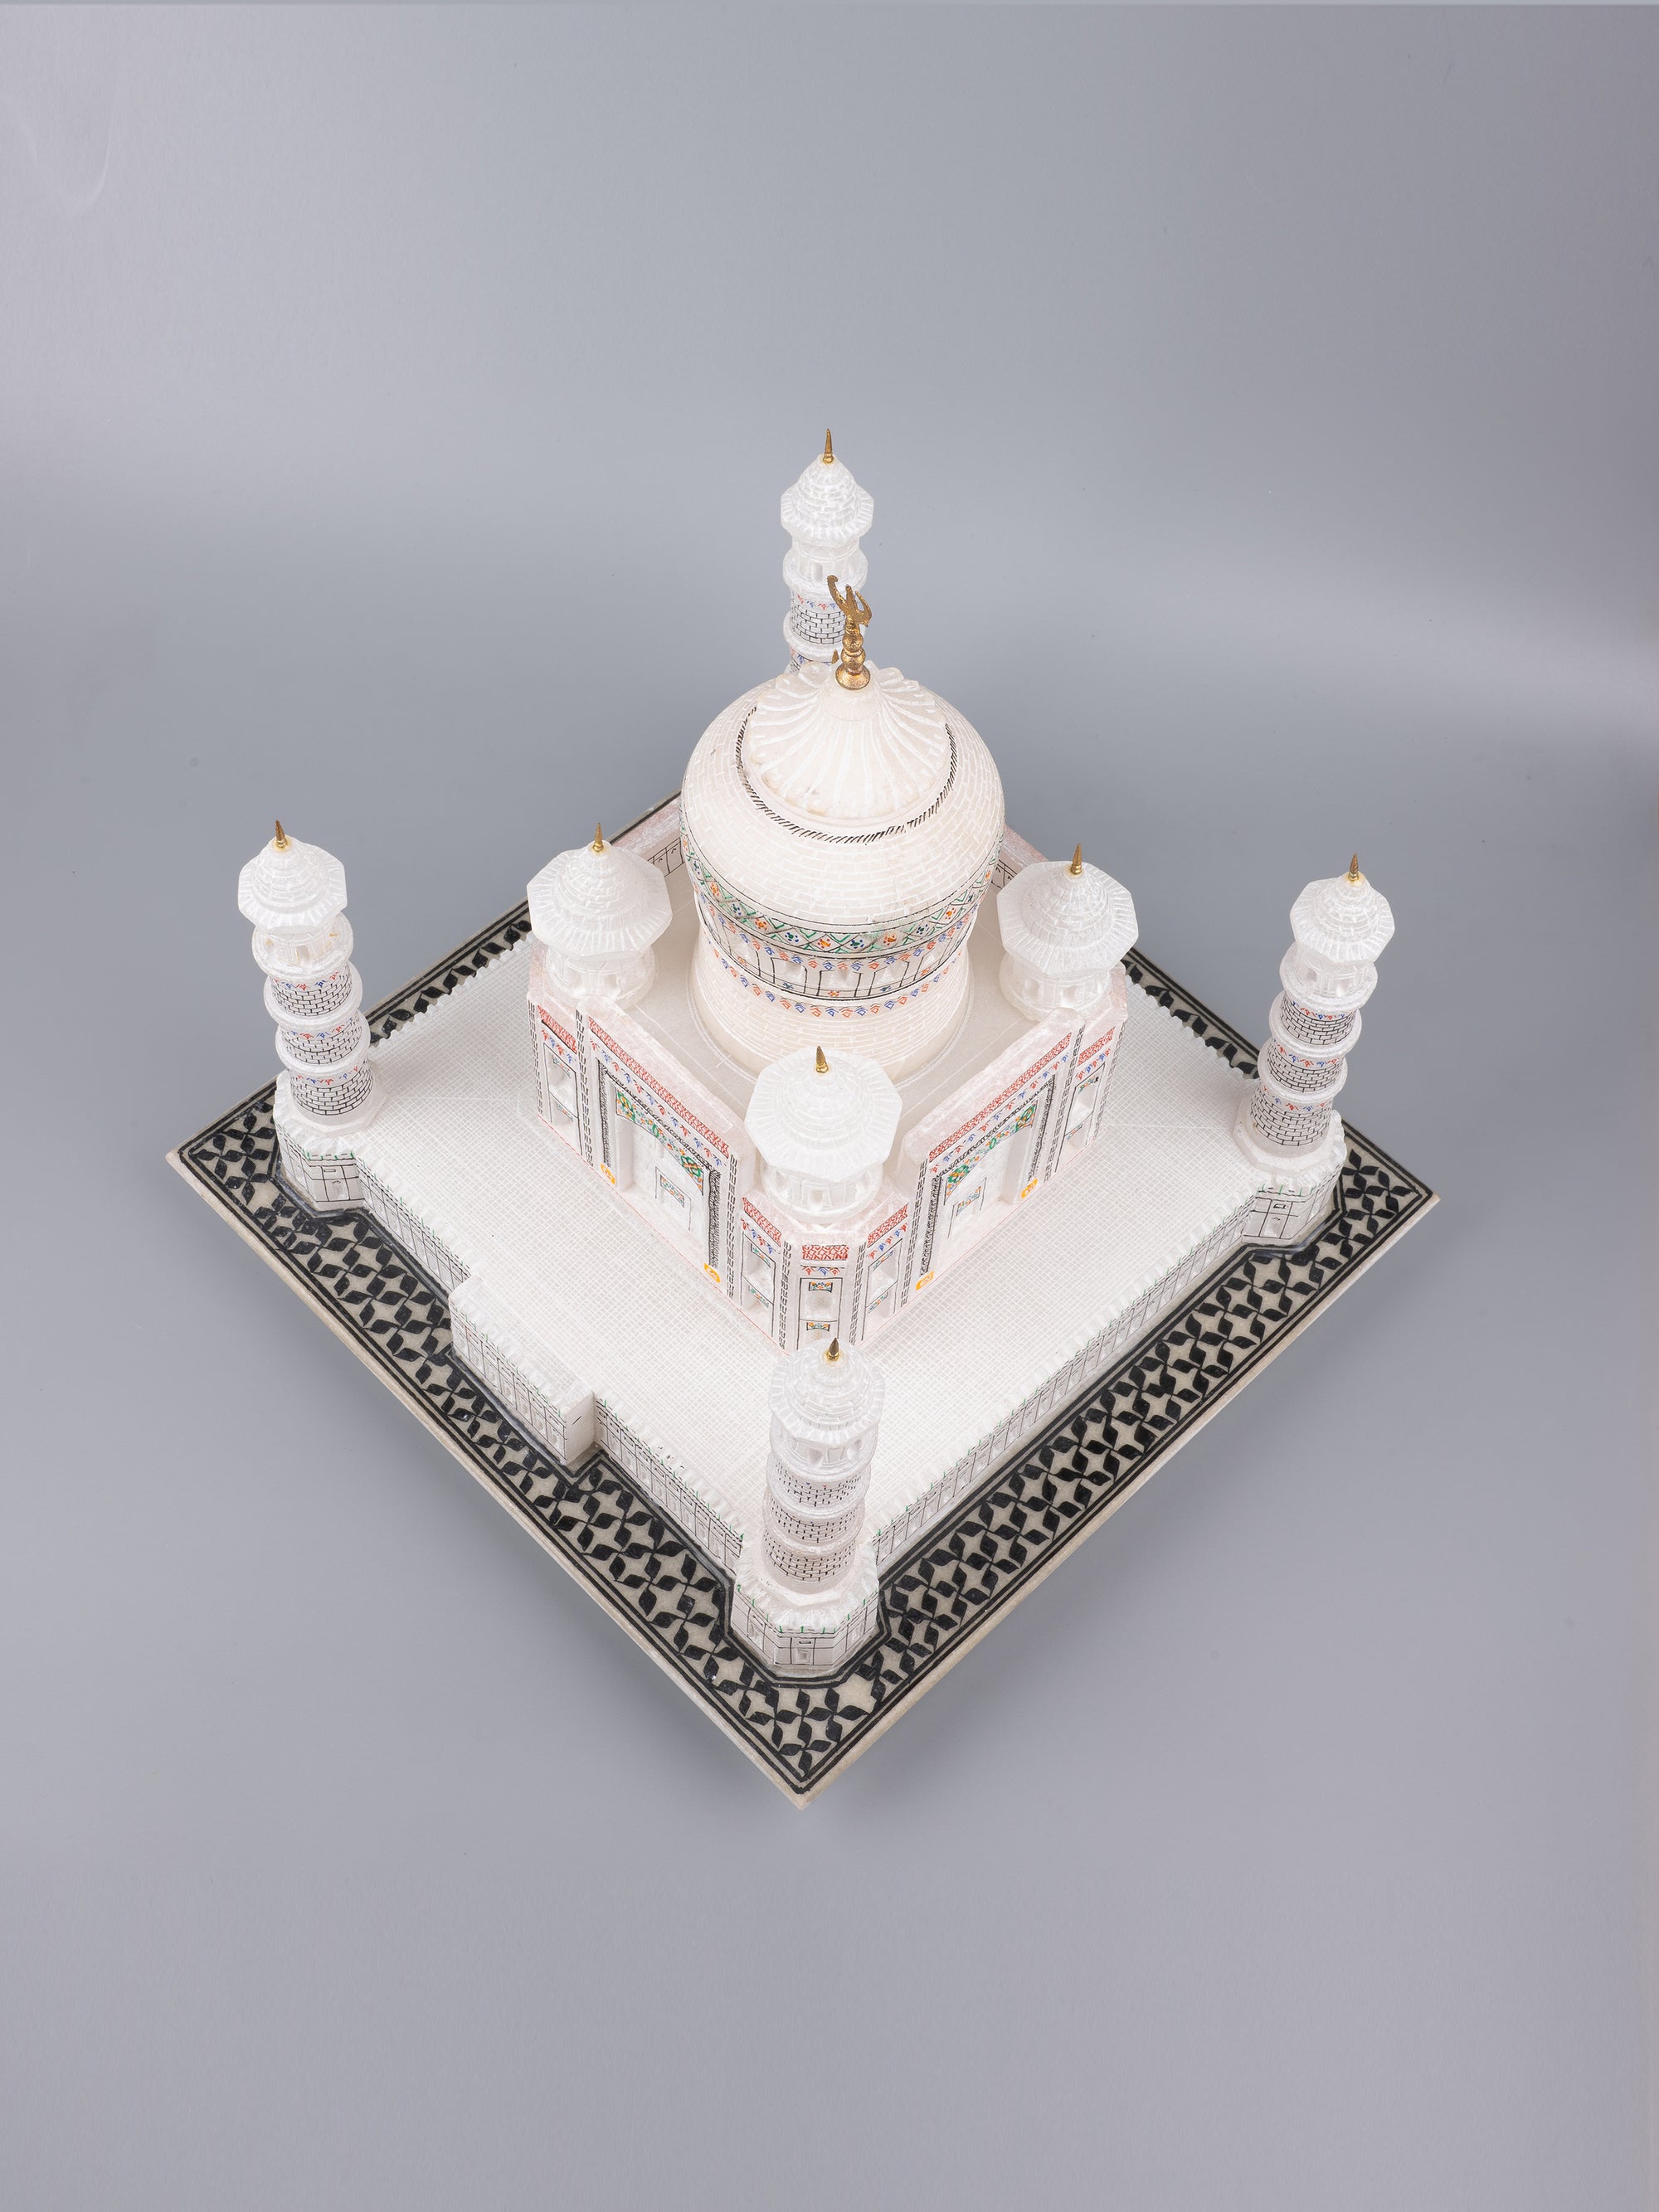 12 inches colorful Taj Mahal replica, home decor item - The Heritage Artifacts